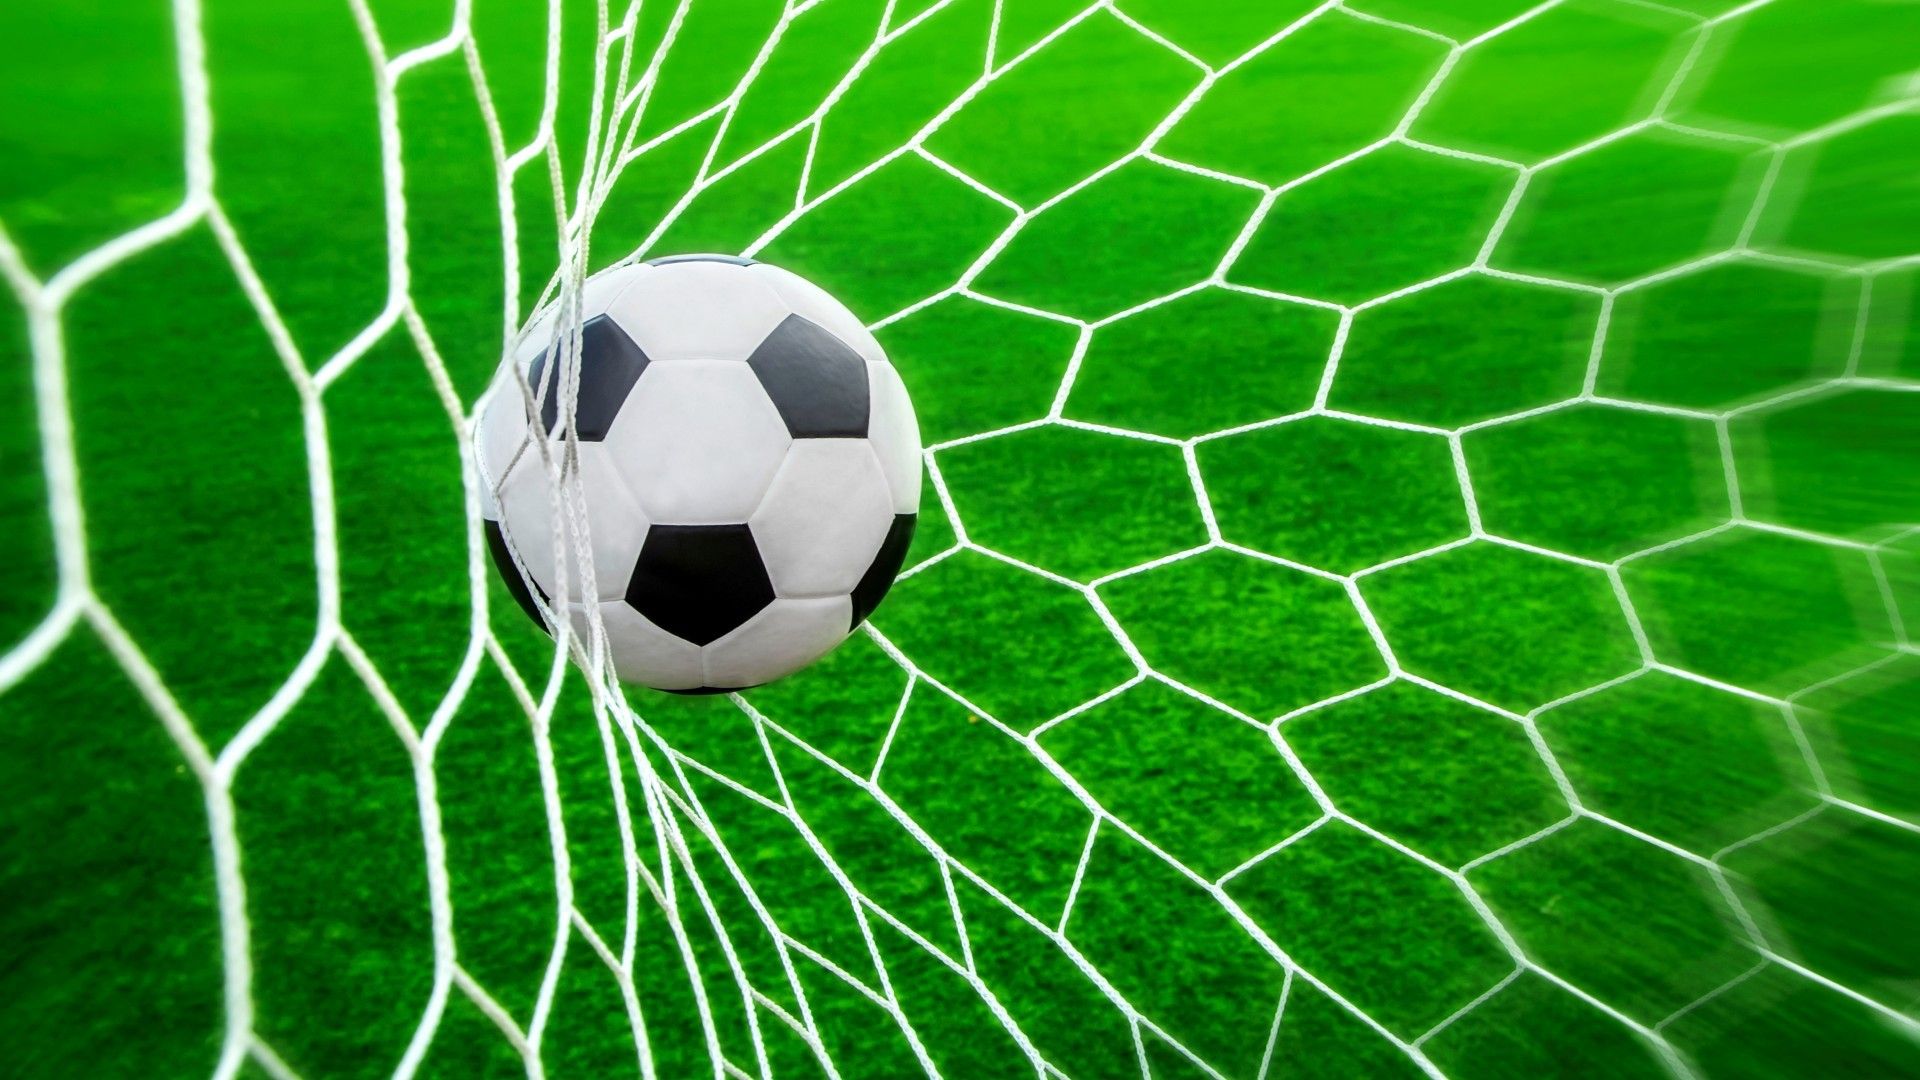 Free download Ball and net for football wallpaper and image wallpaper picture [1920x1080] for your Desktop, Mobile & Tablet. Explore Soccer Ball Wallpaper. Nike Soccer Ball Wallpaper, Cool Green